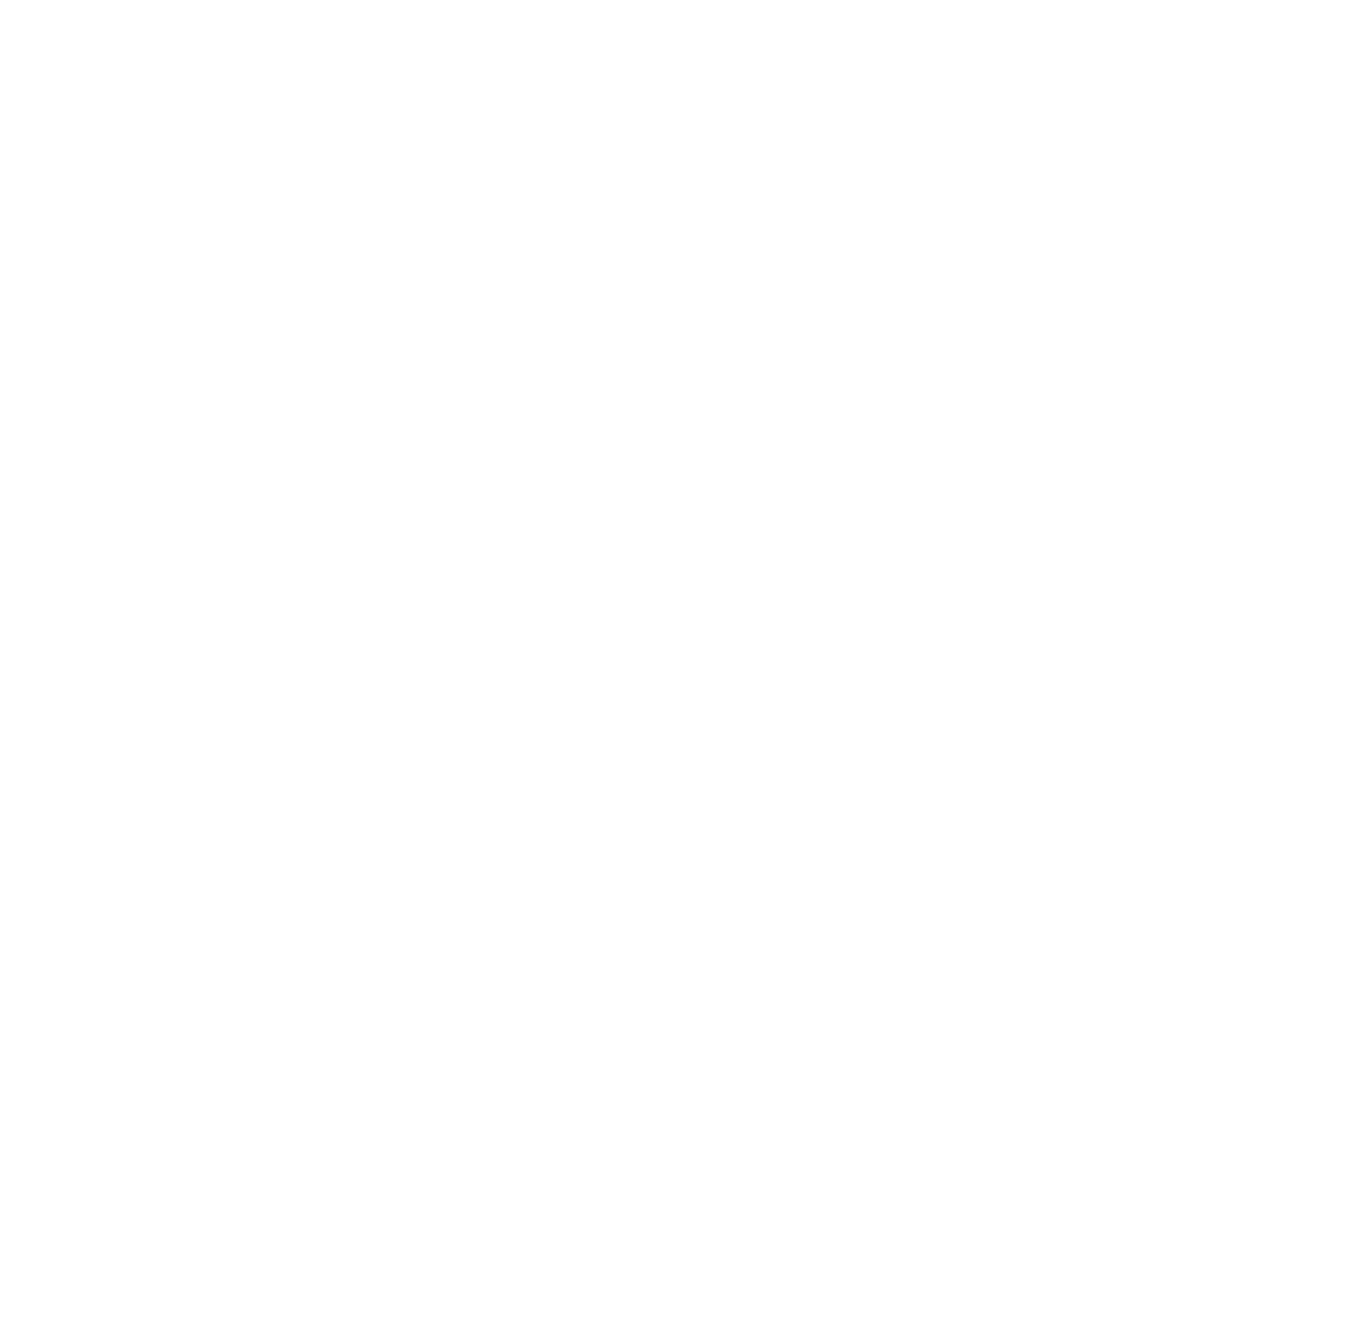 New Perspectives Counseling Services